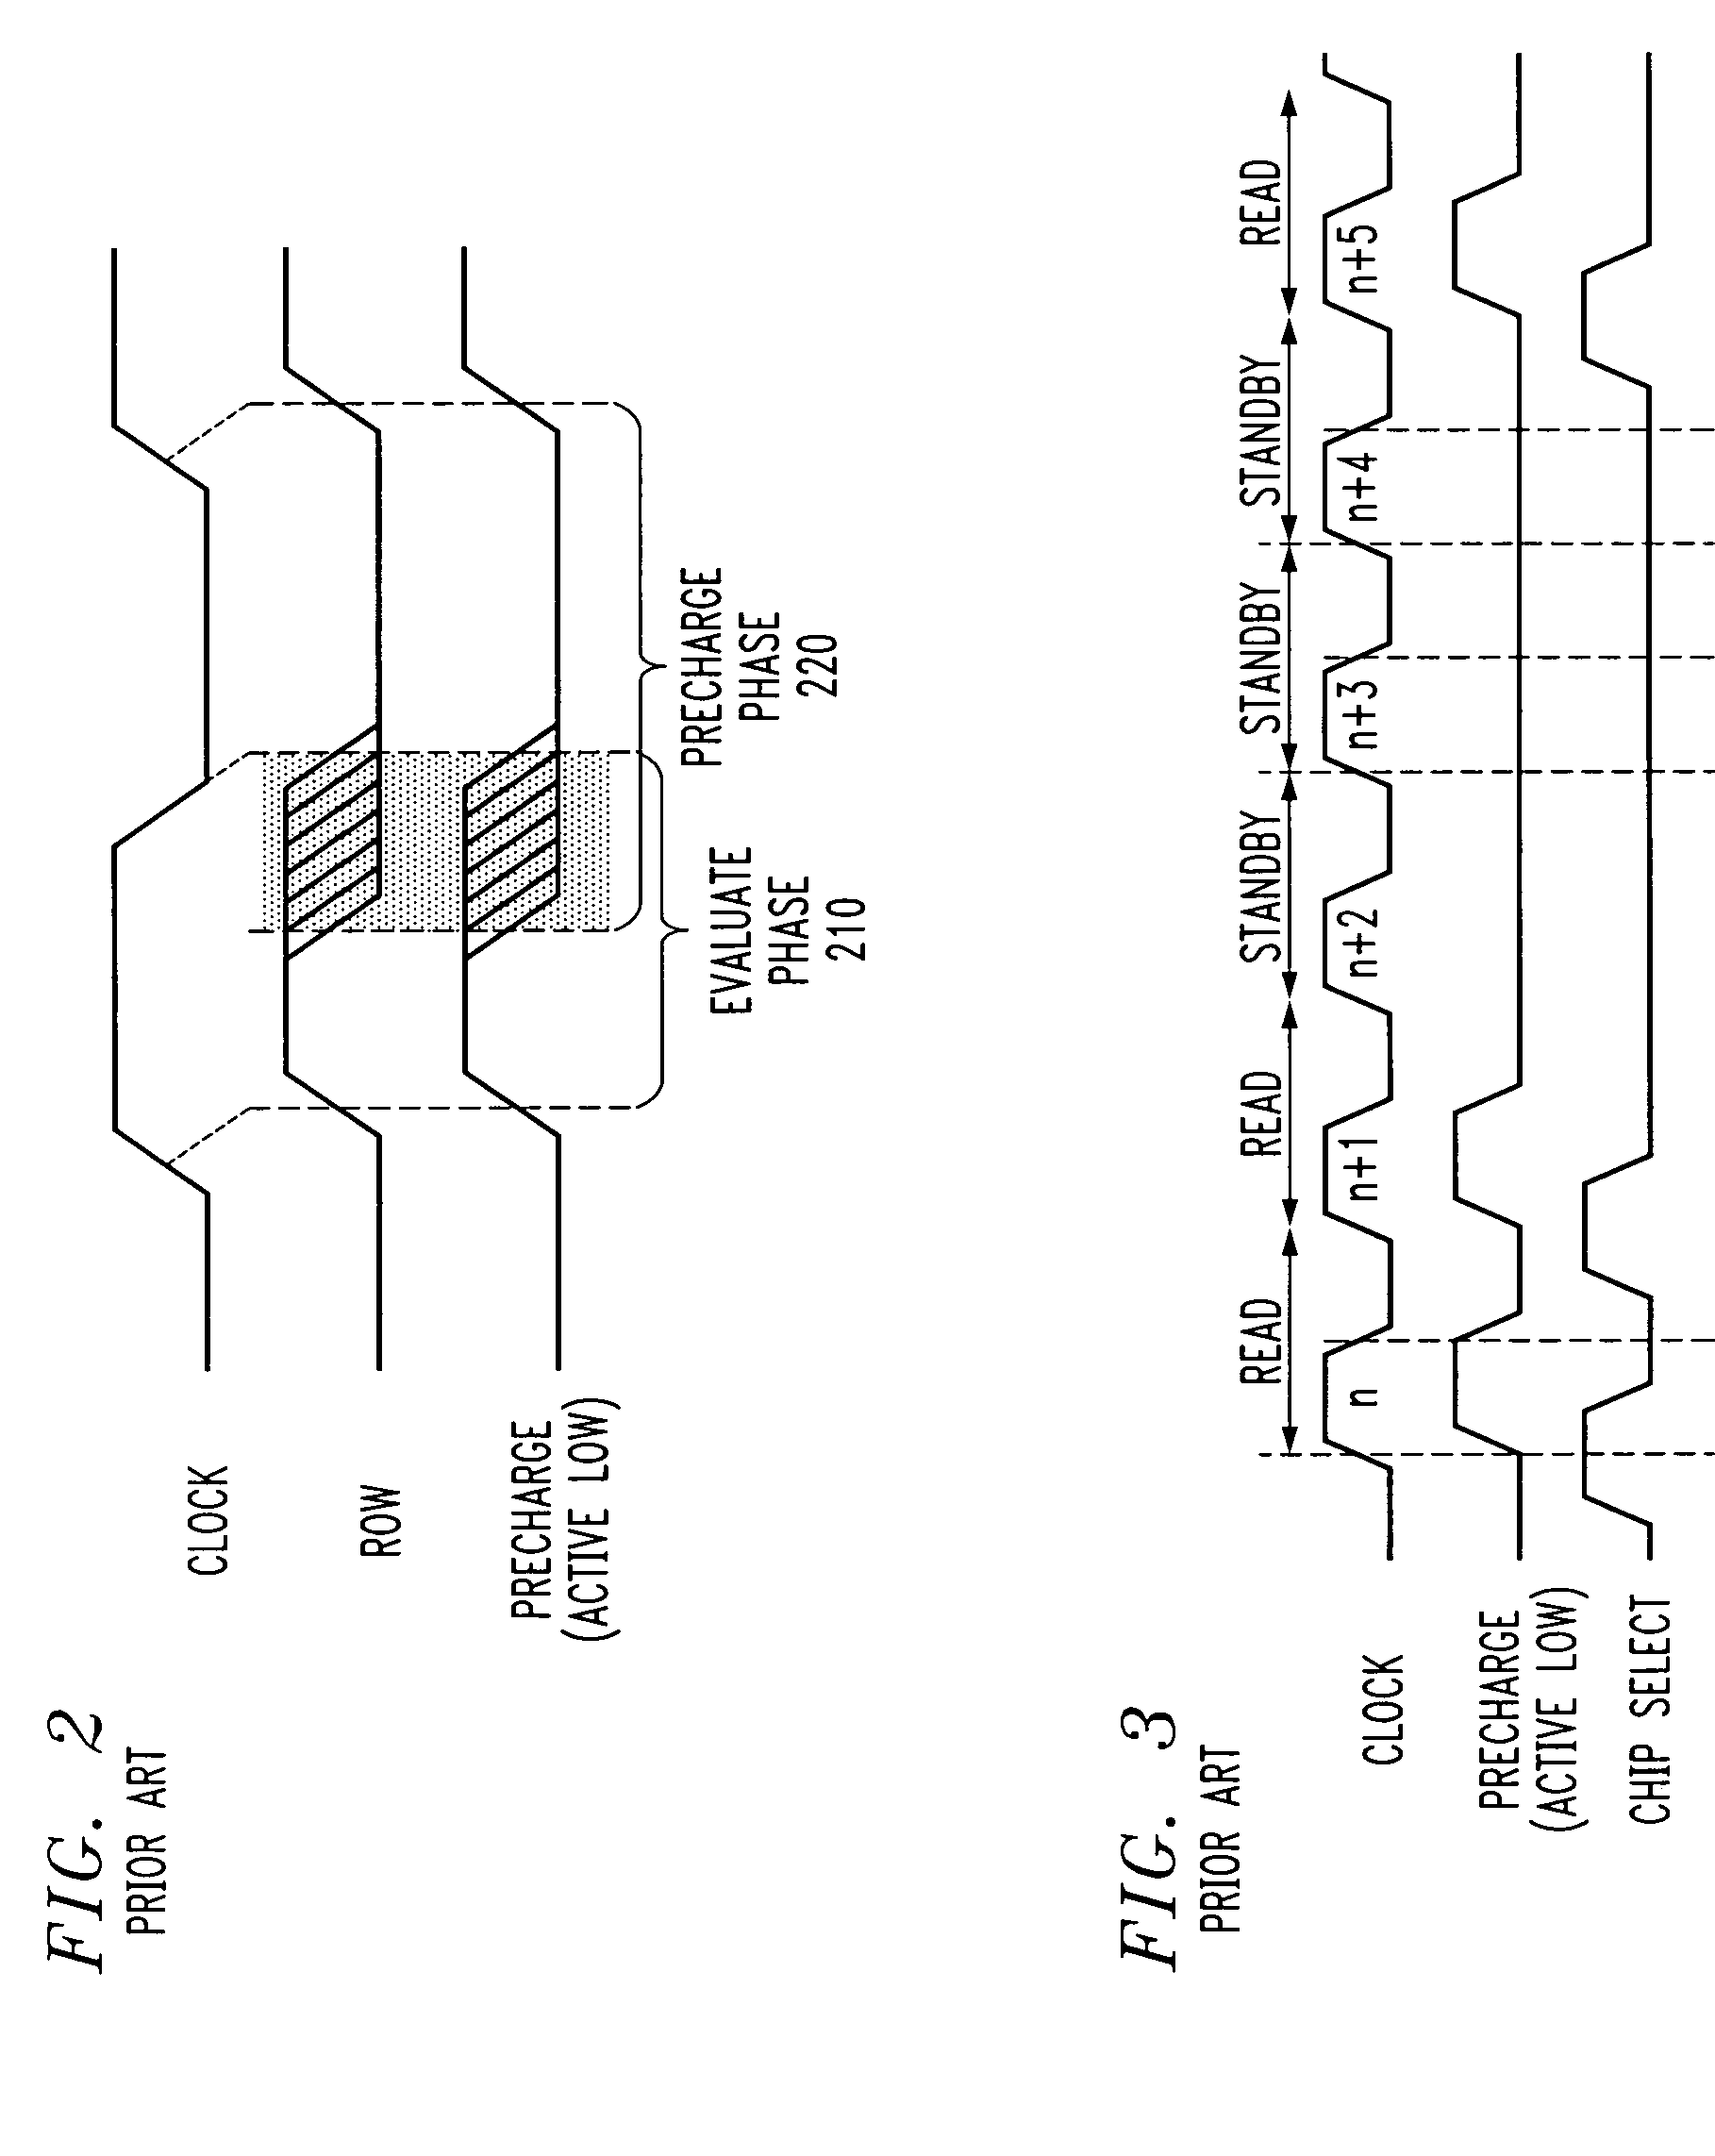 Method and apparatus for reducing leakage current in a read only memory device using pre-charged sub-arrays